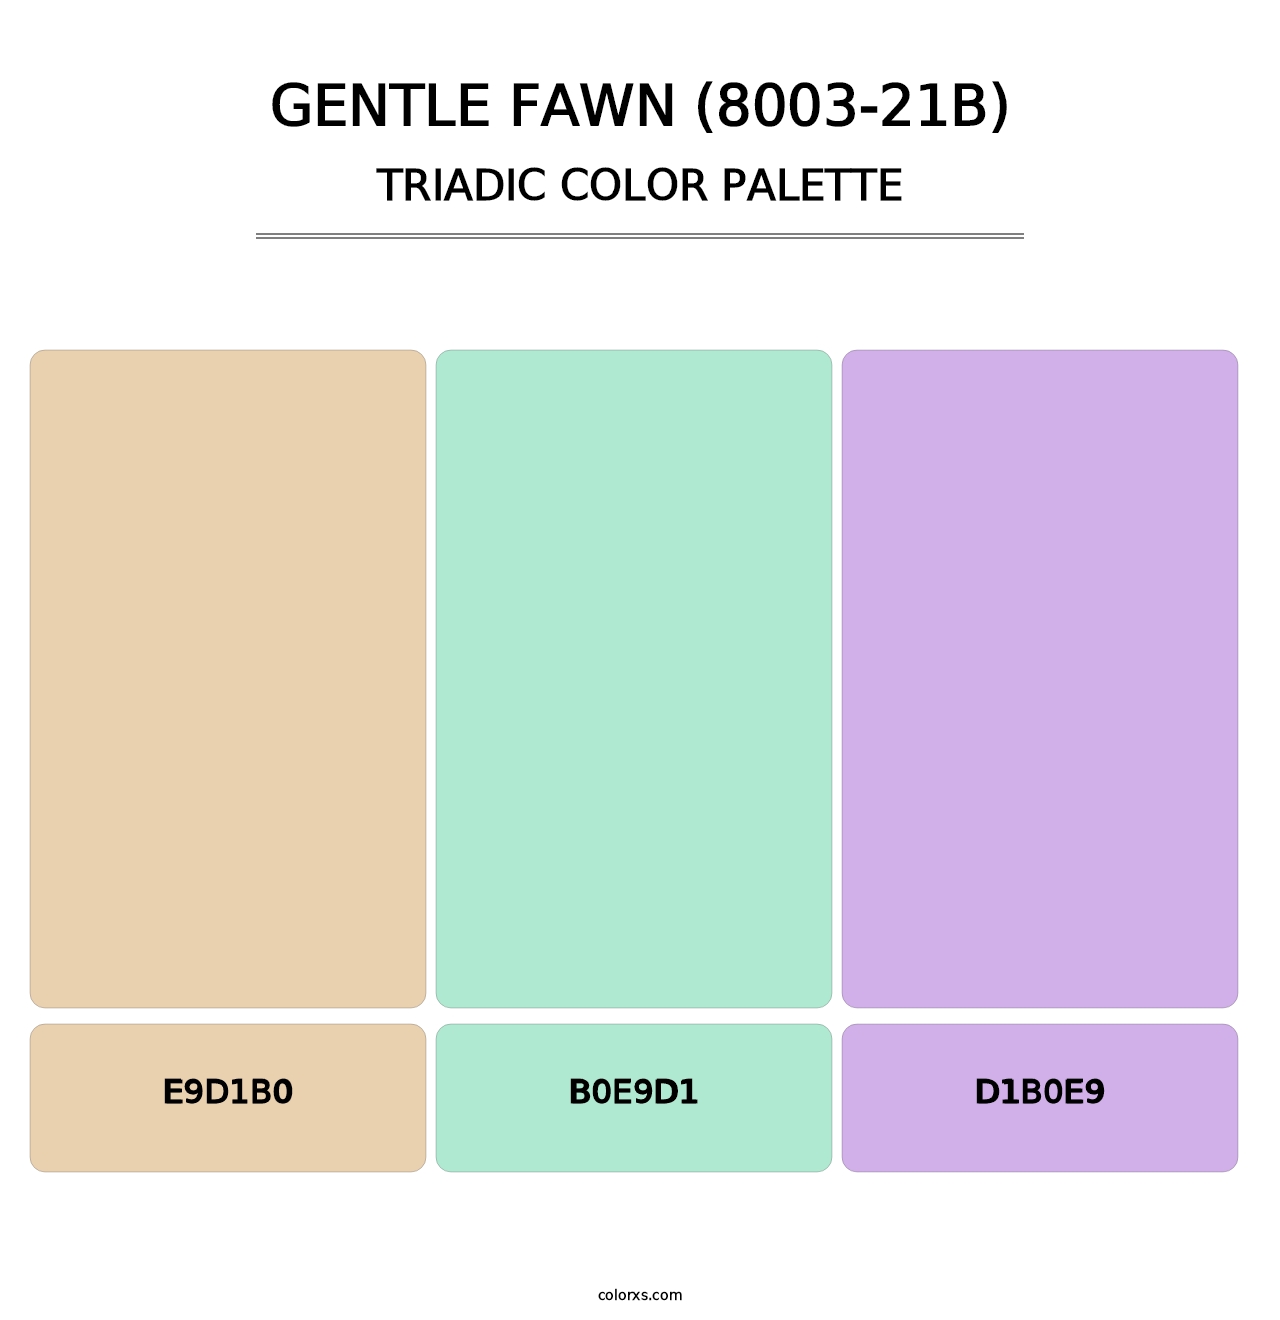 Gentle Fawn (8003-21B) - Triadic Color Palette